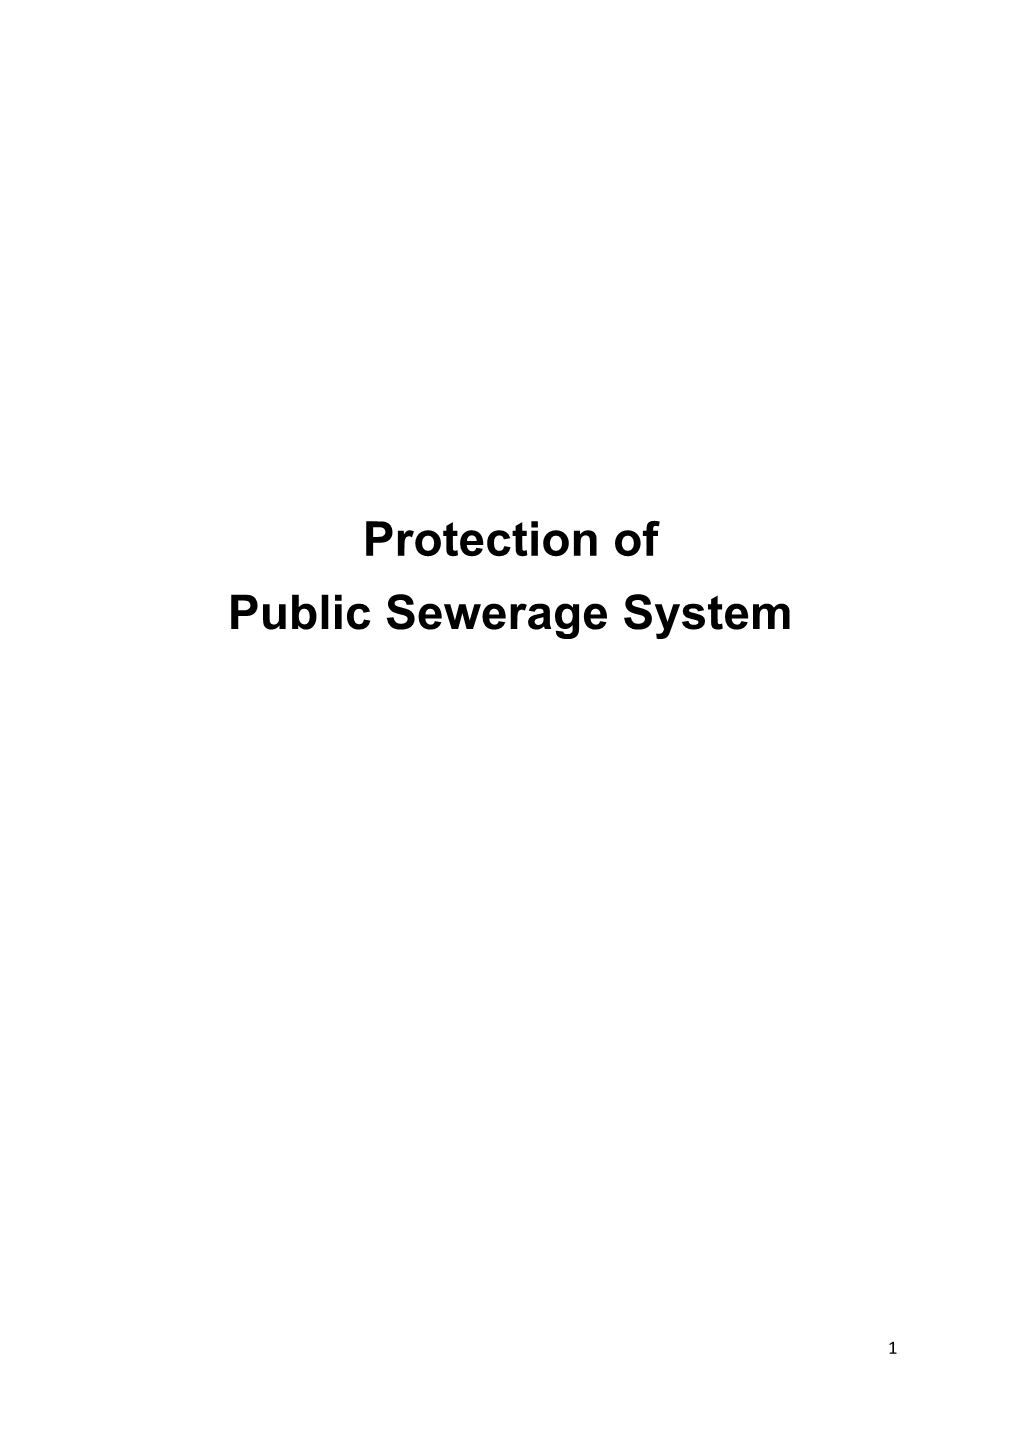 Protection of Public Sewerage System